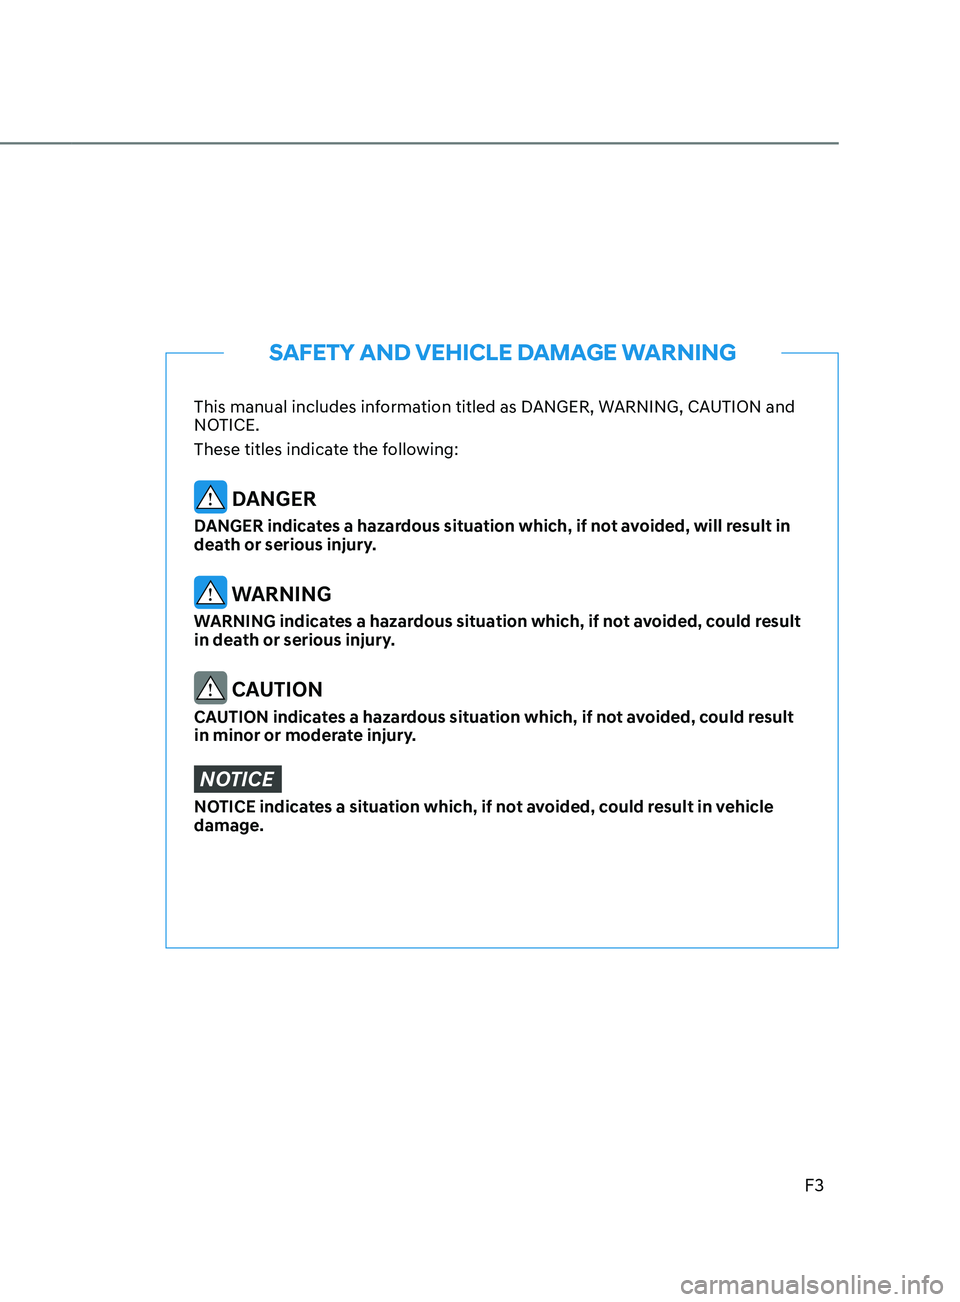 HYUNDAI SANTA FE CALLIGRAPHY 2021  Owners Manual F3
This manual includes information titled as DANGER, WARNING, CAUTION and 
NOTICE.
These titles indicate the following:
 DANGER
DANGER indicates a hazardous situation which, if not avoided, will resu